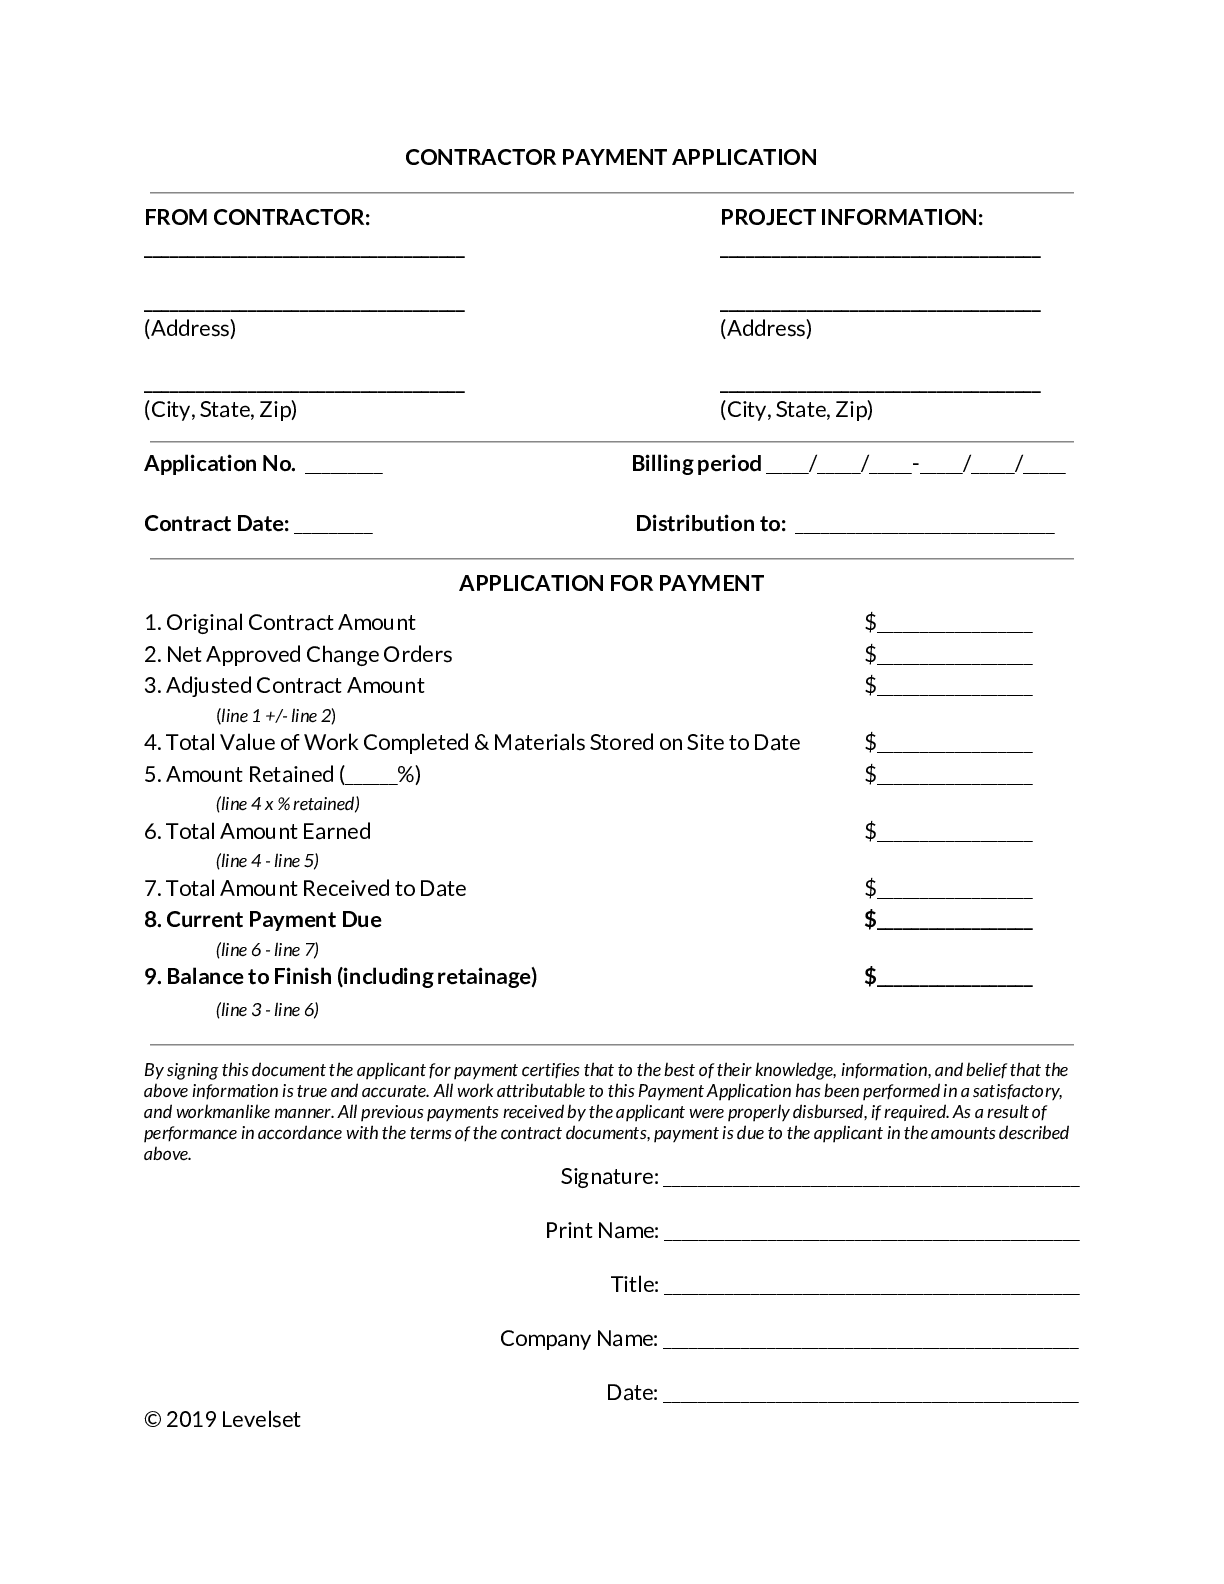 Pay Applications in Construction FAQs, Guide, & Forms